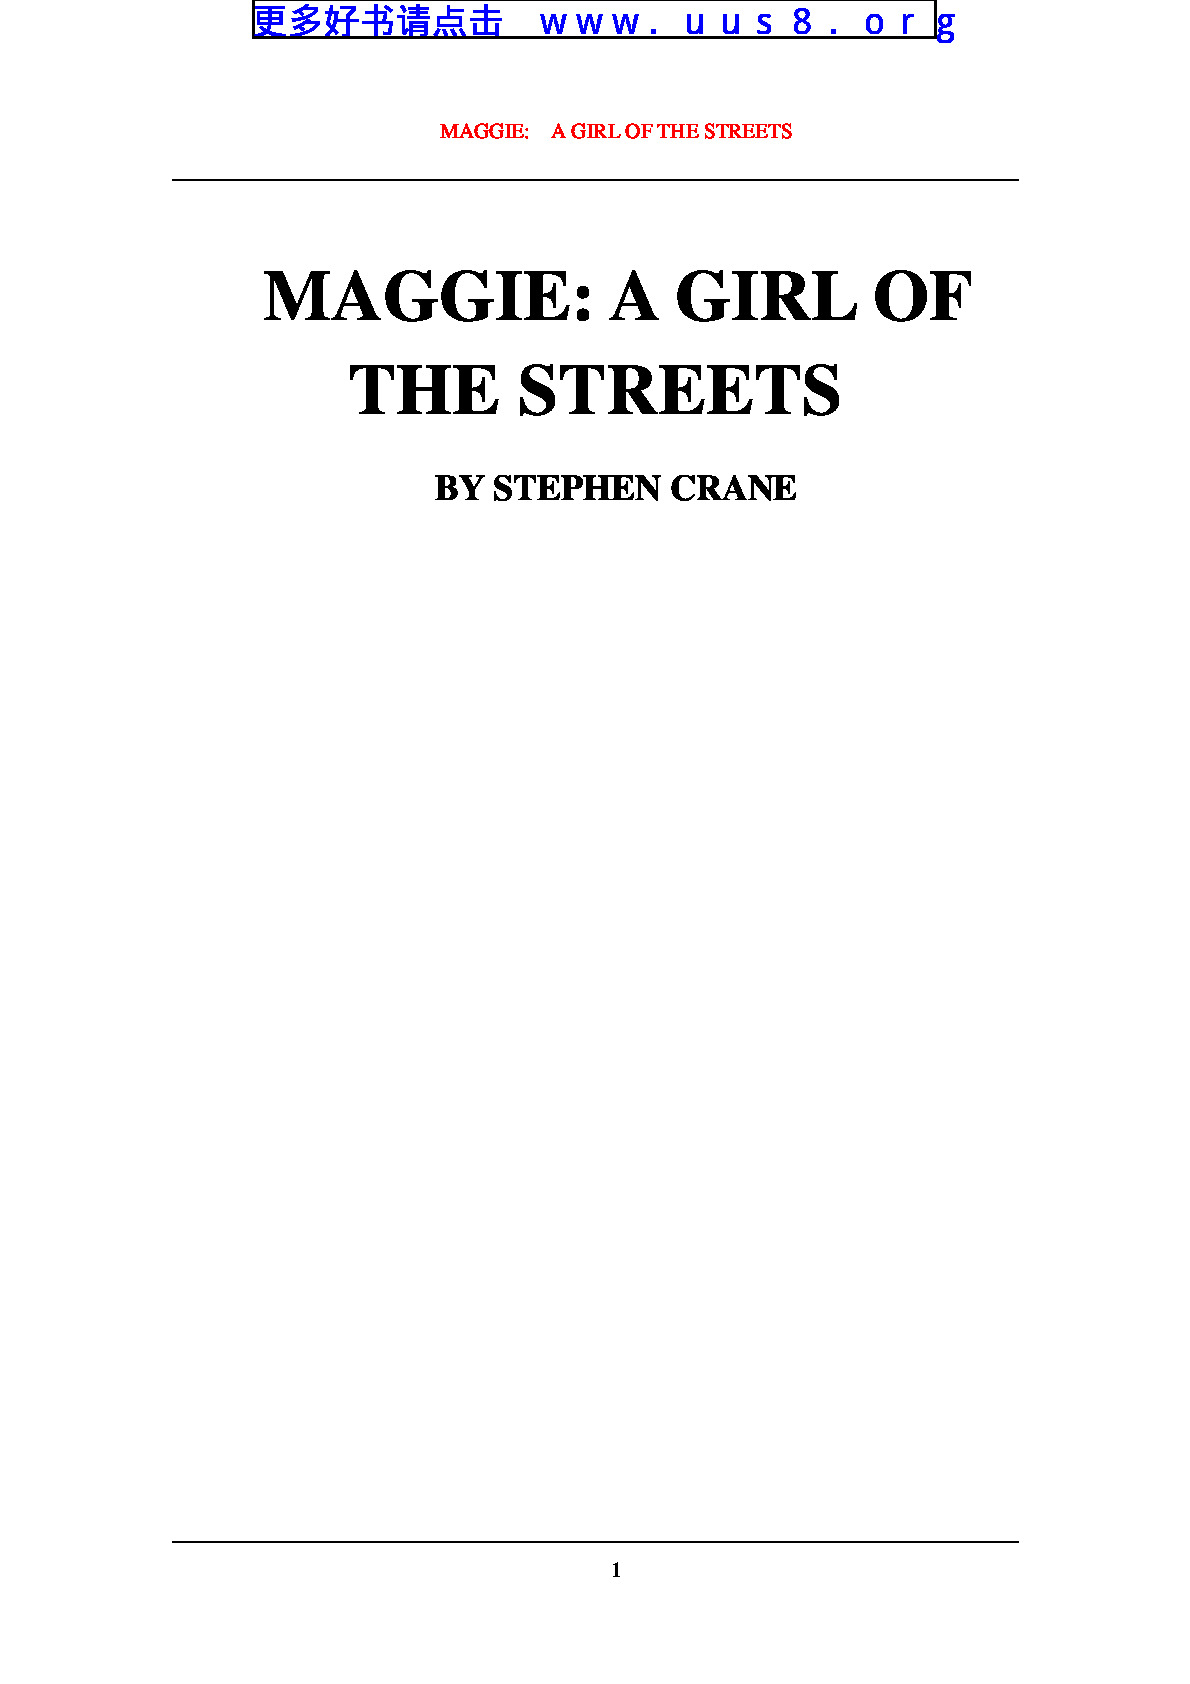 MAGGIE-_A_GIRL_OF_THE_STREETS(街头女郎梅季)